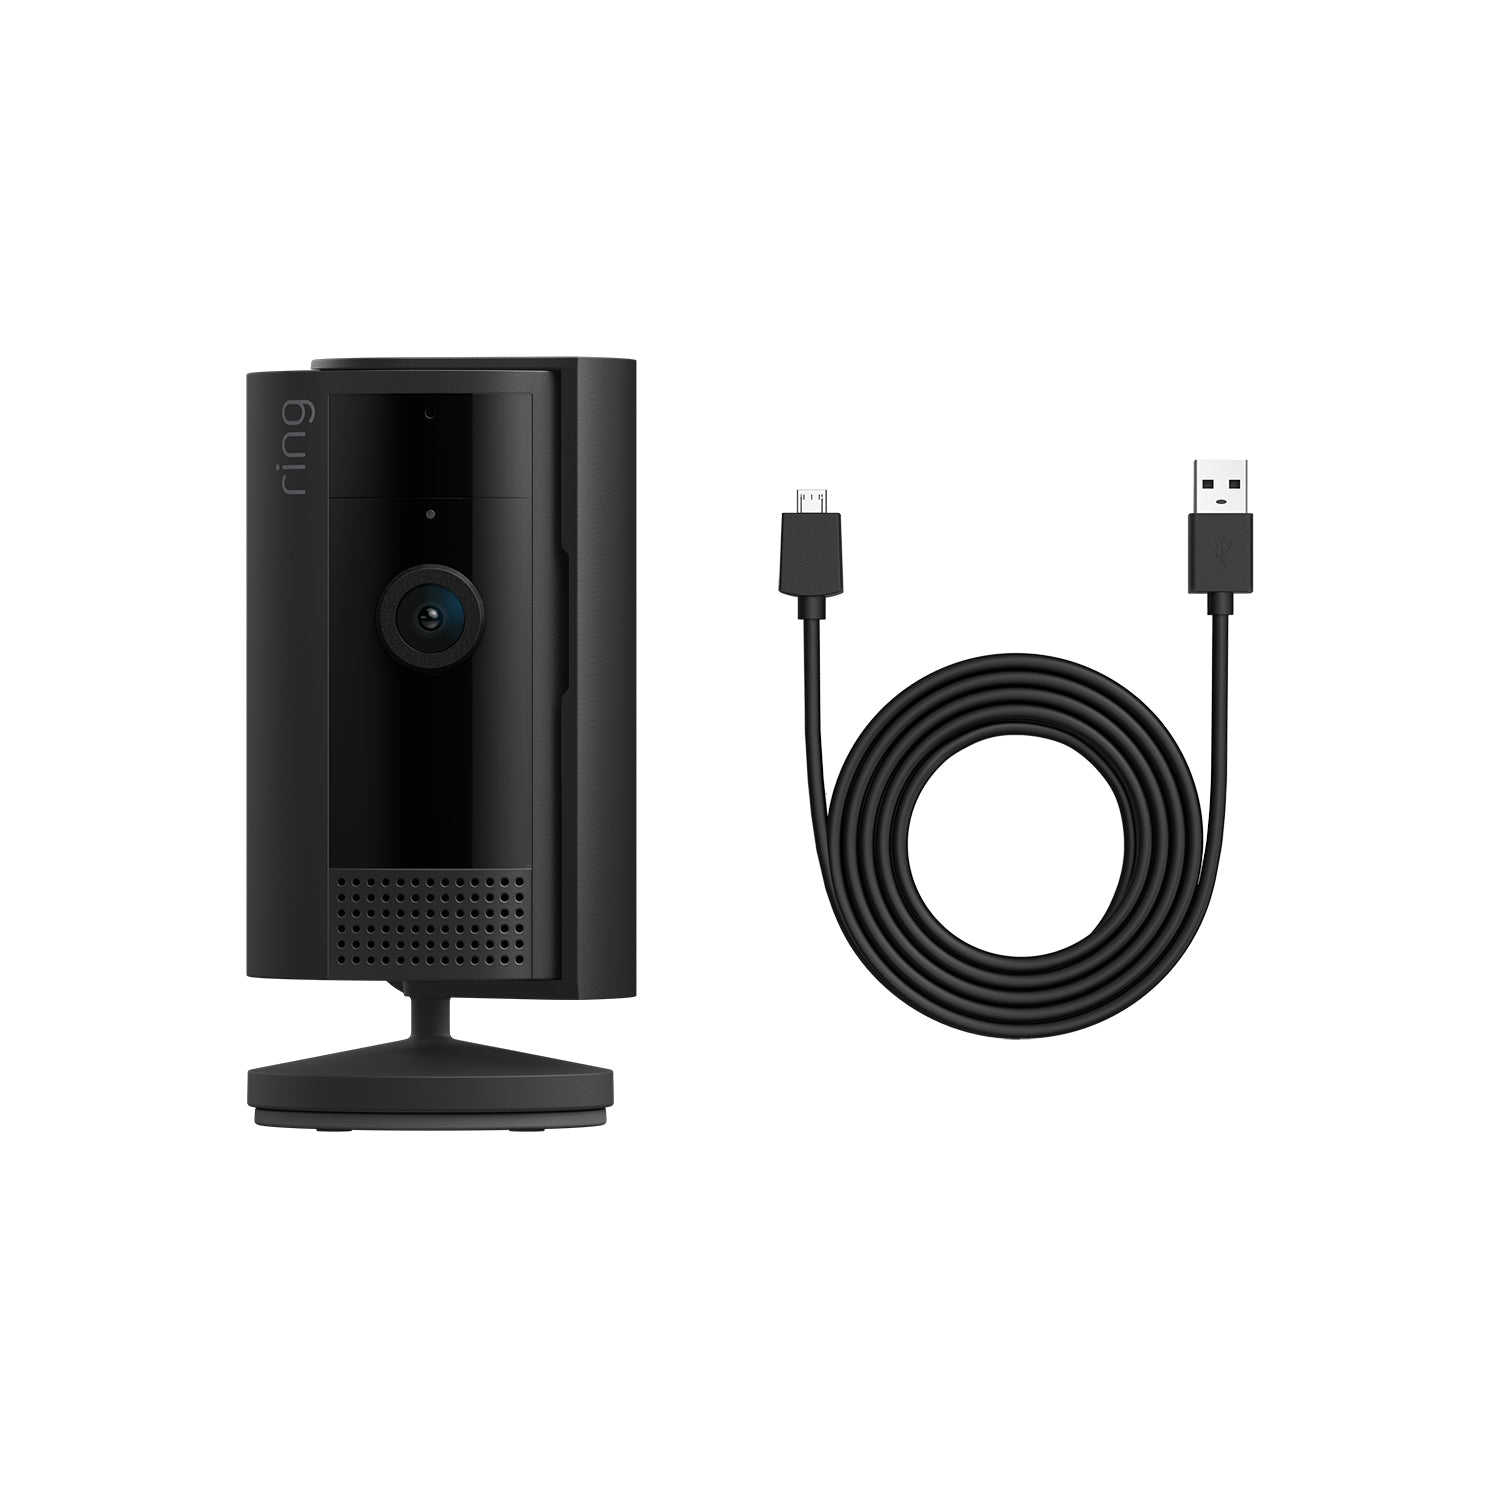 High Reach Bundle (Indoor Cam (2nd Gen) with 10 ft Micro USB Power Cable) - Black